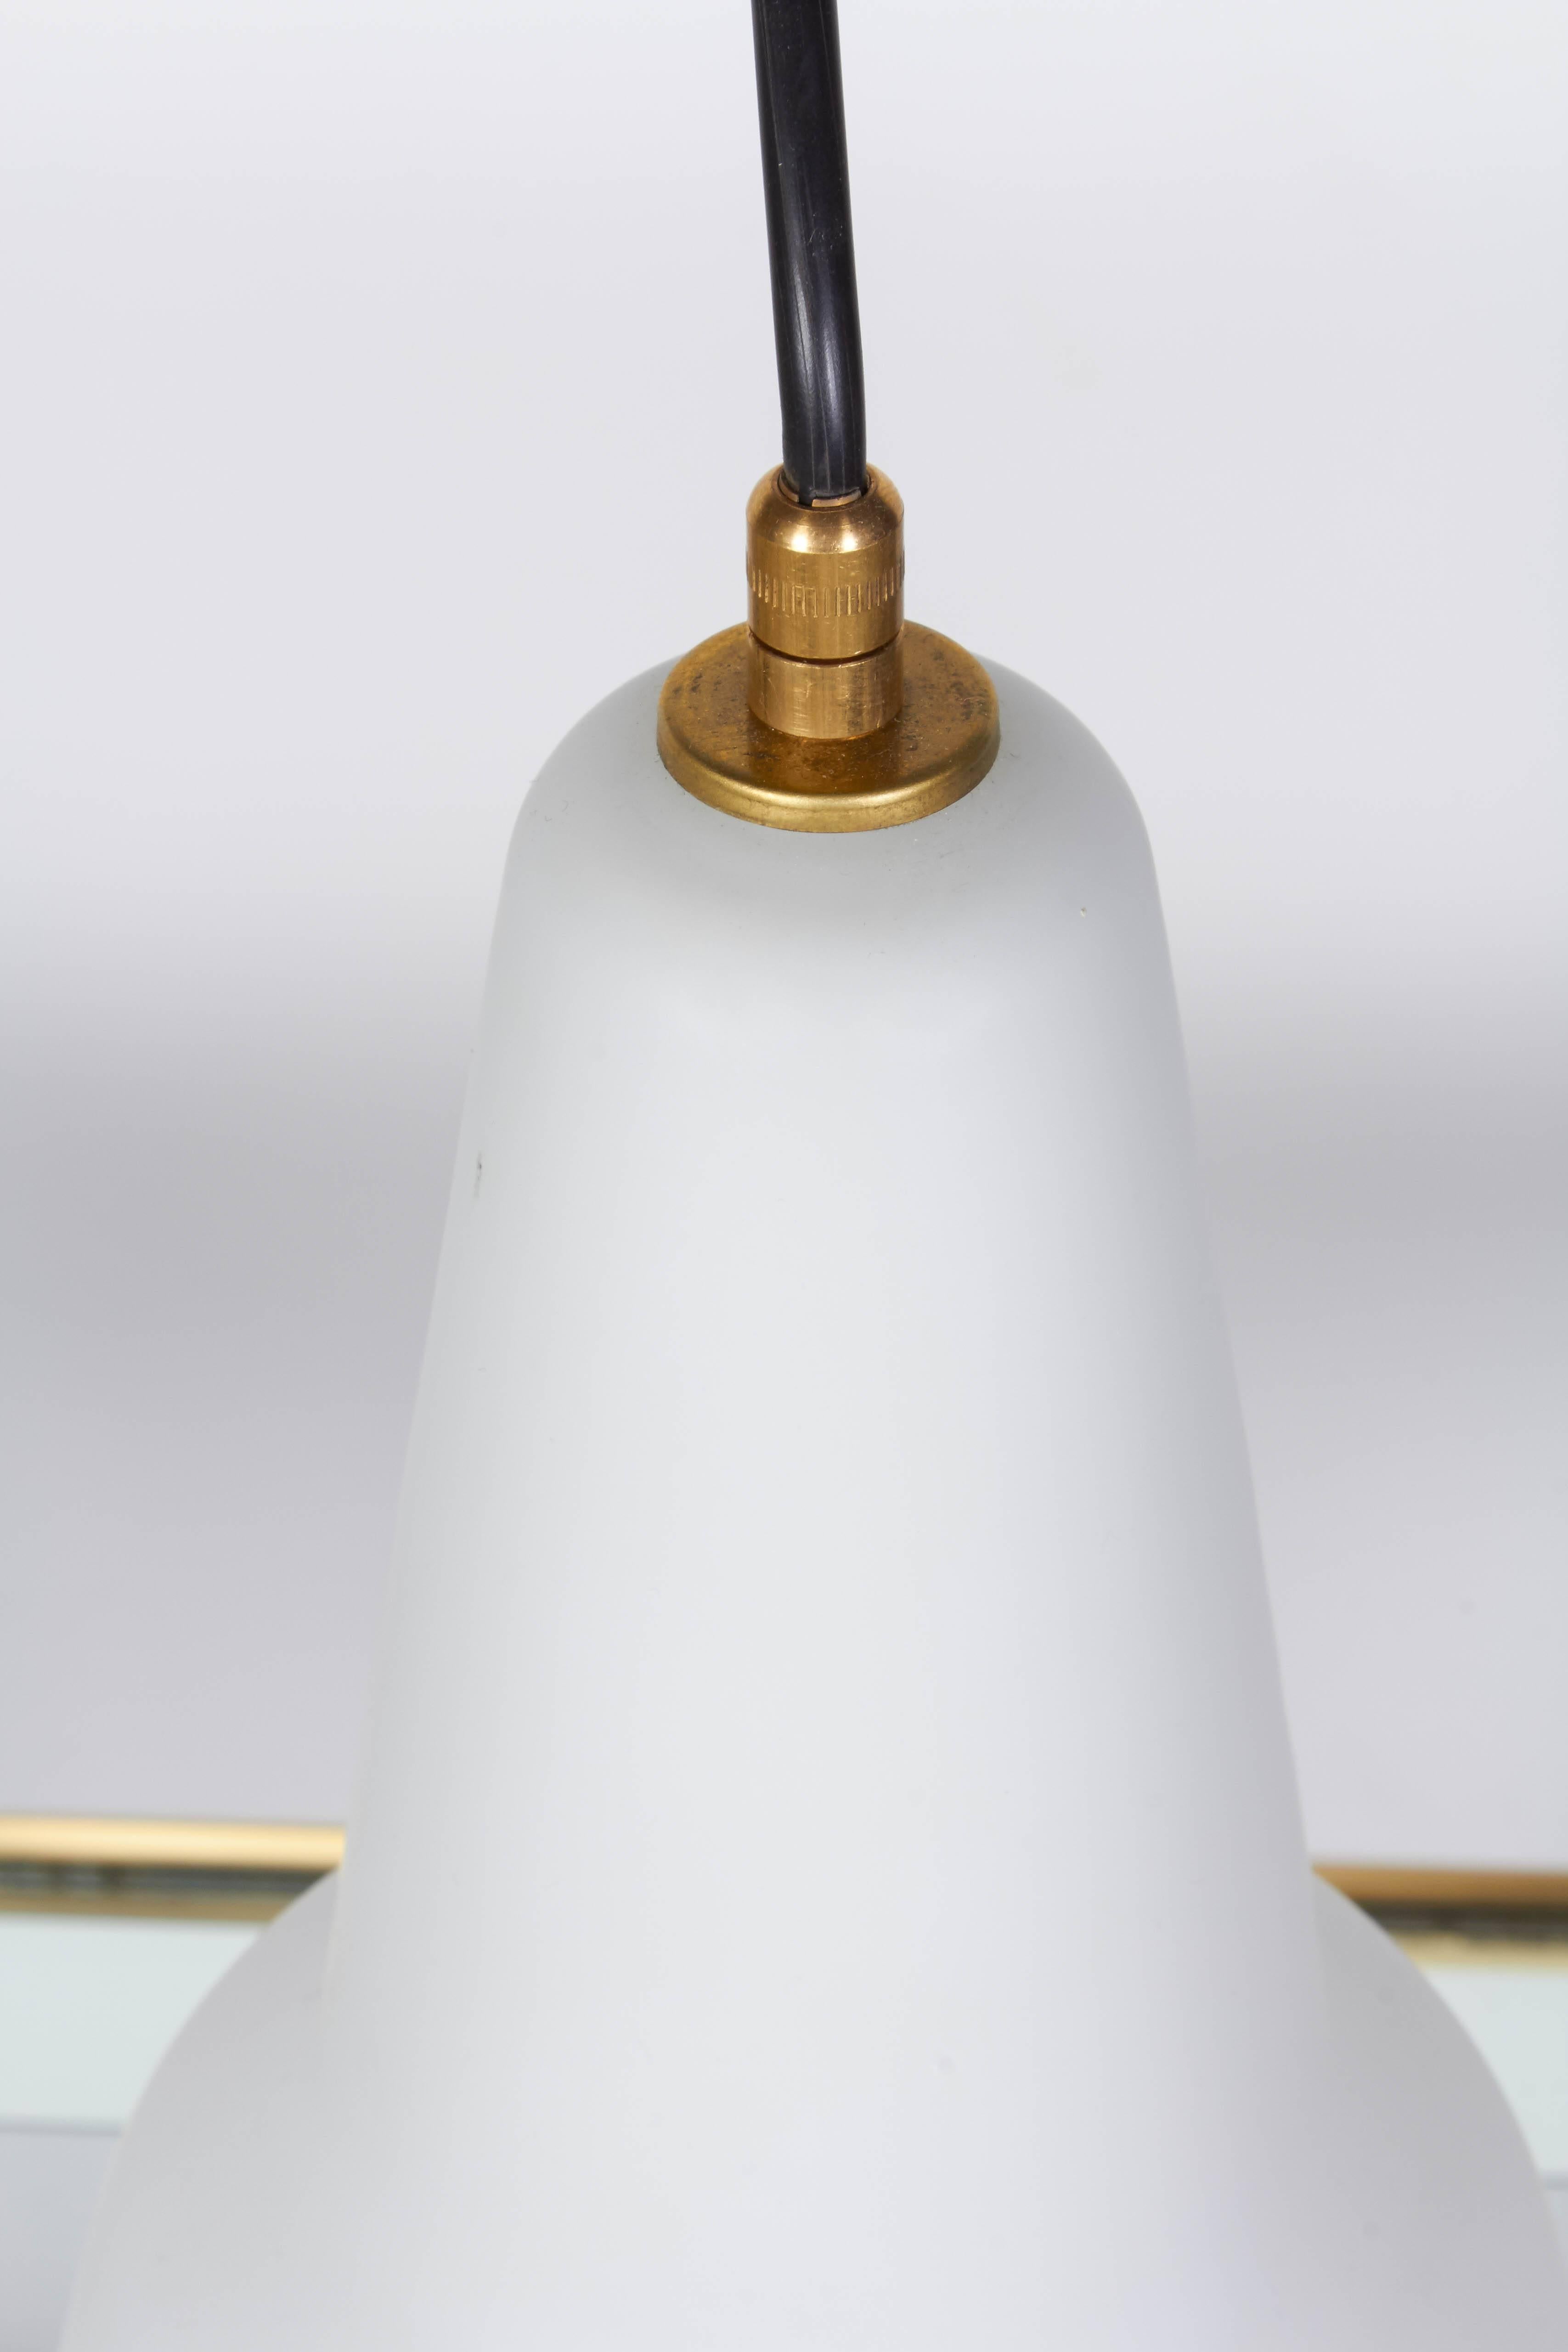 One of a group of Italian handblown pendant light, circa 1950. Glass shade is layered with a clear satin finished over white in a tear drop shape. Holds one standard light bulb. Measures: Shade is 8.5